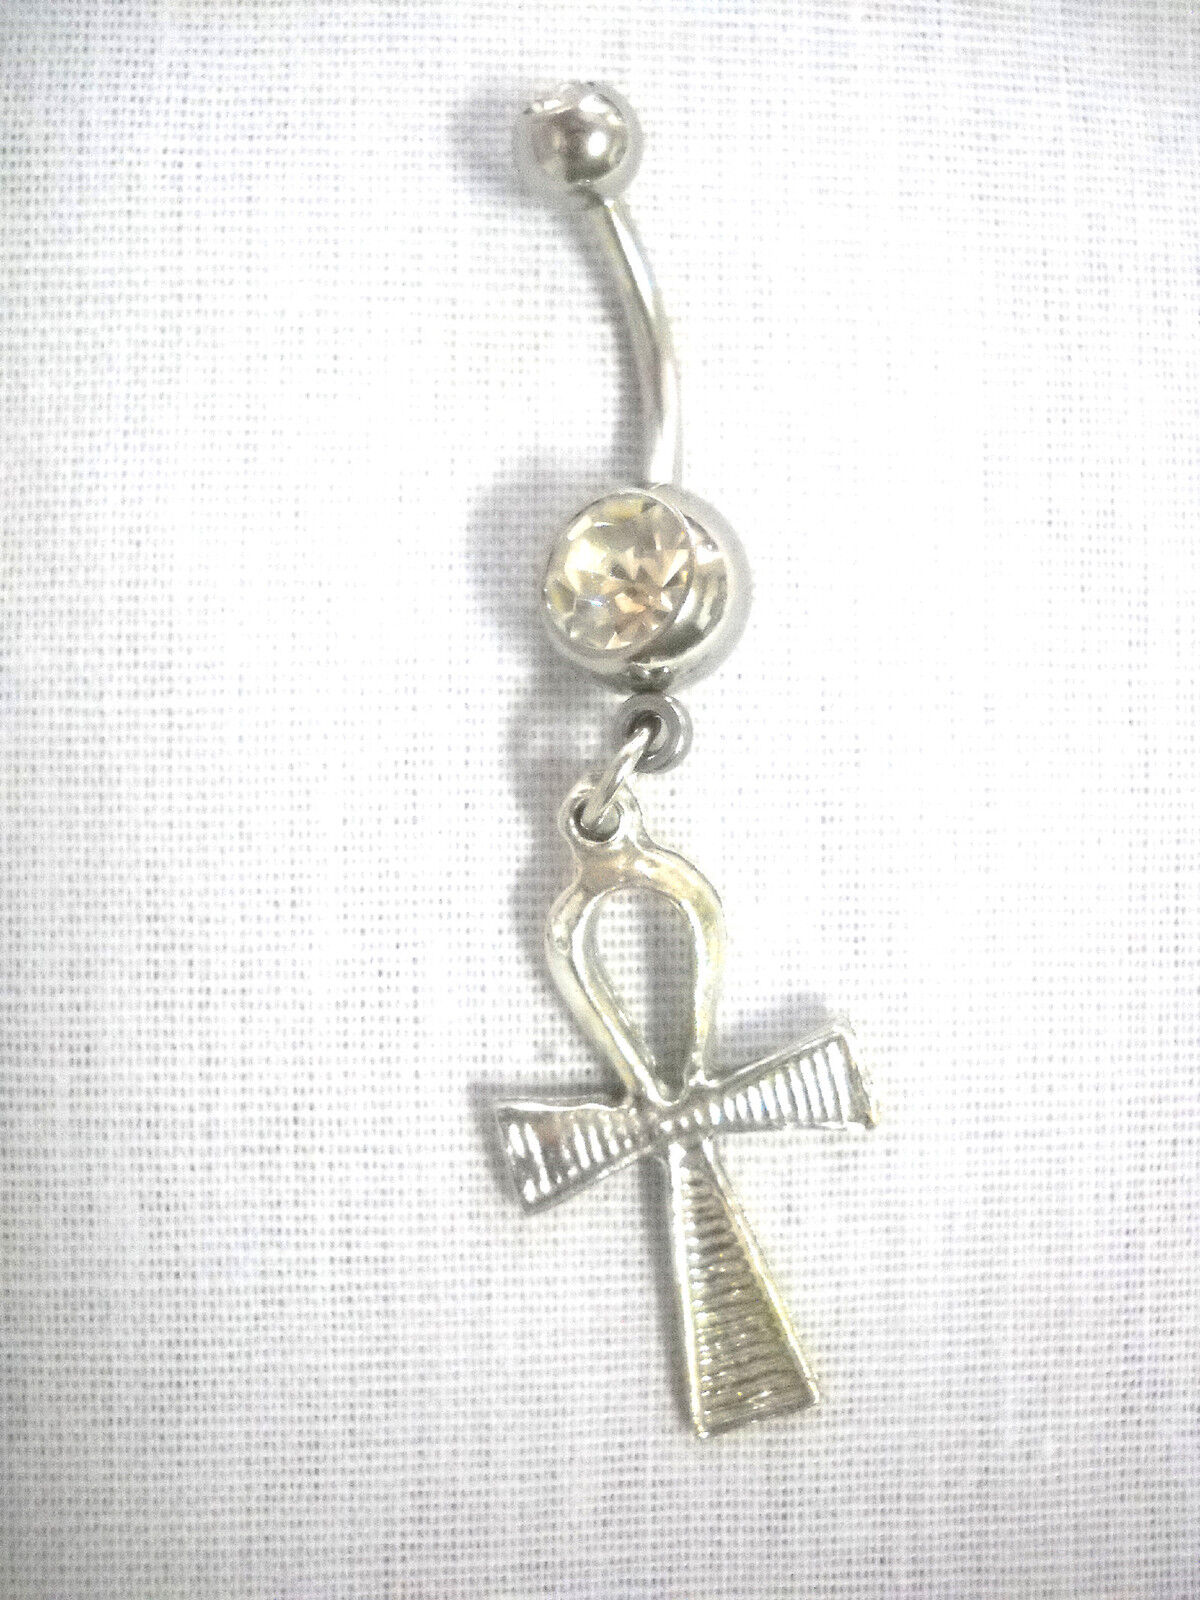 EGYPTIAN ANHK / ANKH ETERNAL LIFE TAU CROSS PEWTER CHARM 14g CLEAR CZ BELLY  RING